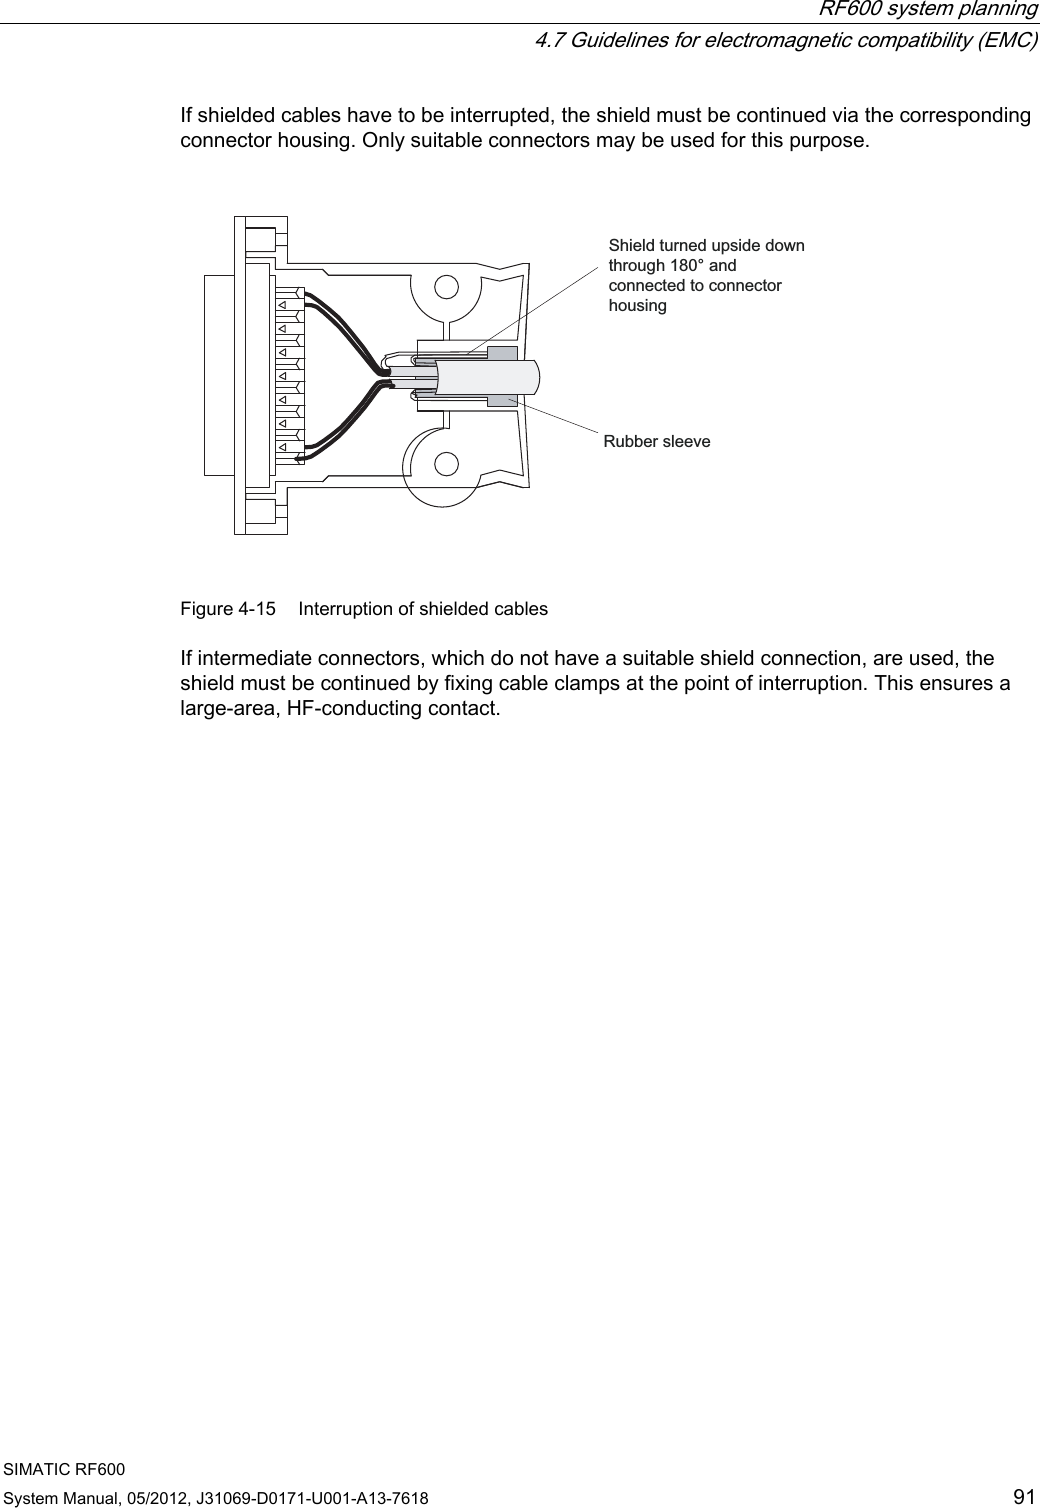  RF600 system planning   4.7 Guidelines for electromagnetic compatibility (EMC) SIMATIC RF600 System Manual, 05/2012, J31069-D0171-U001-A13-7618  91 If shielded cables have to be interrupted, the shield must be continued via the corresponding connector housing. Only suitable connectors may be used for this purpose.  6KLHOGWXUQHGXSVLGHGRZQWKURXJKrDQGFRQQHFWHGWRFRQQHFWRUKRXVLQJ5XEEHUVOHHYH Figure 4-15  Interruption of shielded cables If intermediate connectors, which do not have a suitable shield connection, are used, the shield must be continued by fixing cable clamps at the point of interruption. This ensures a large-area, HF-conducting contact. 